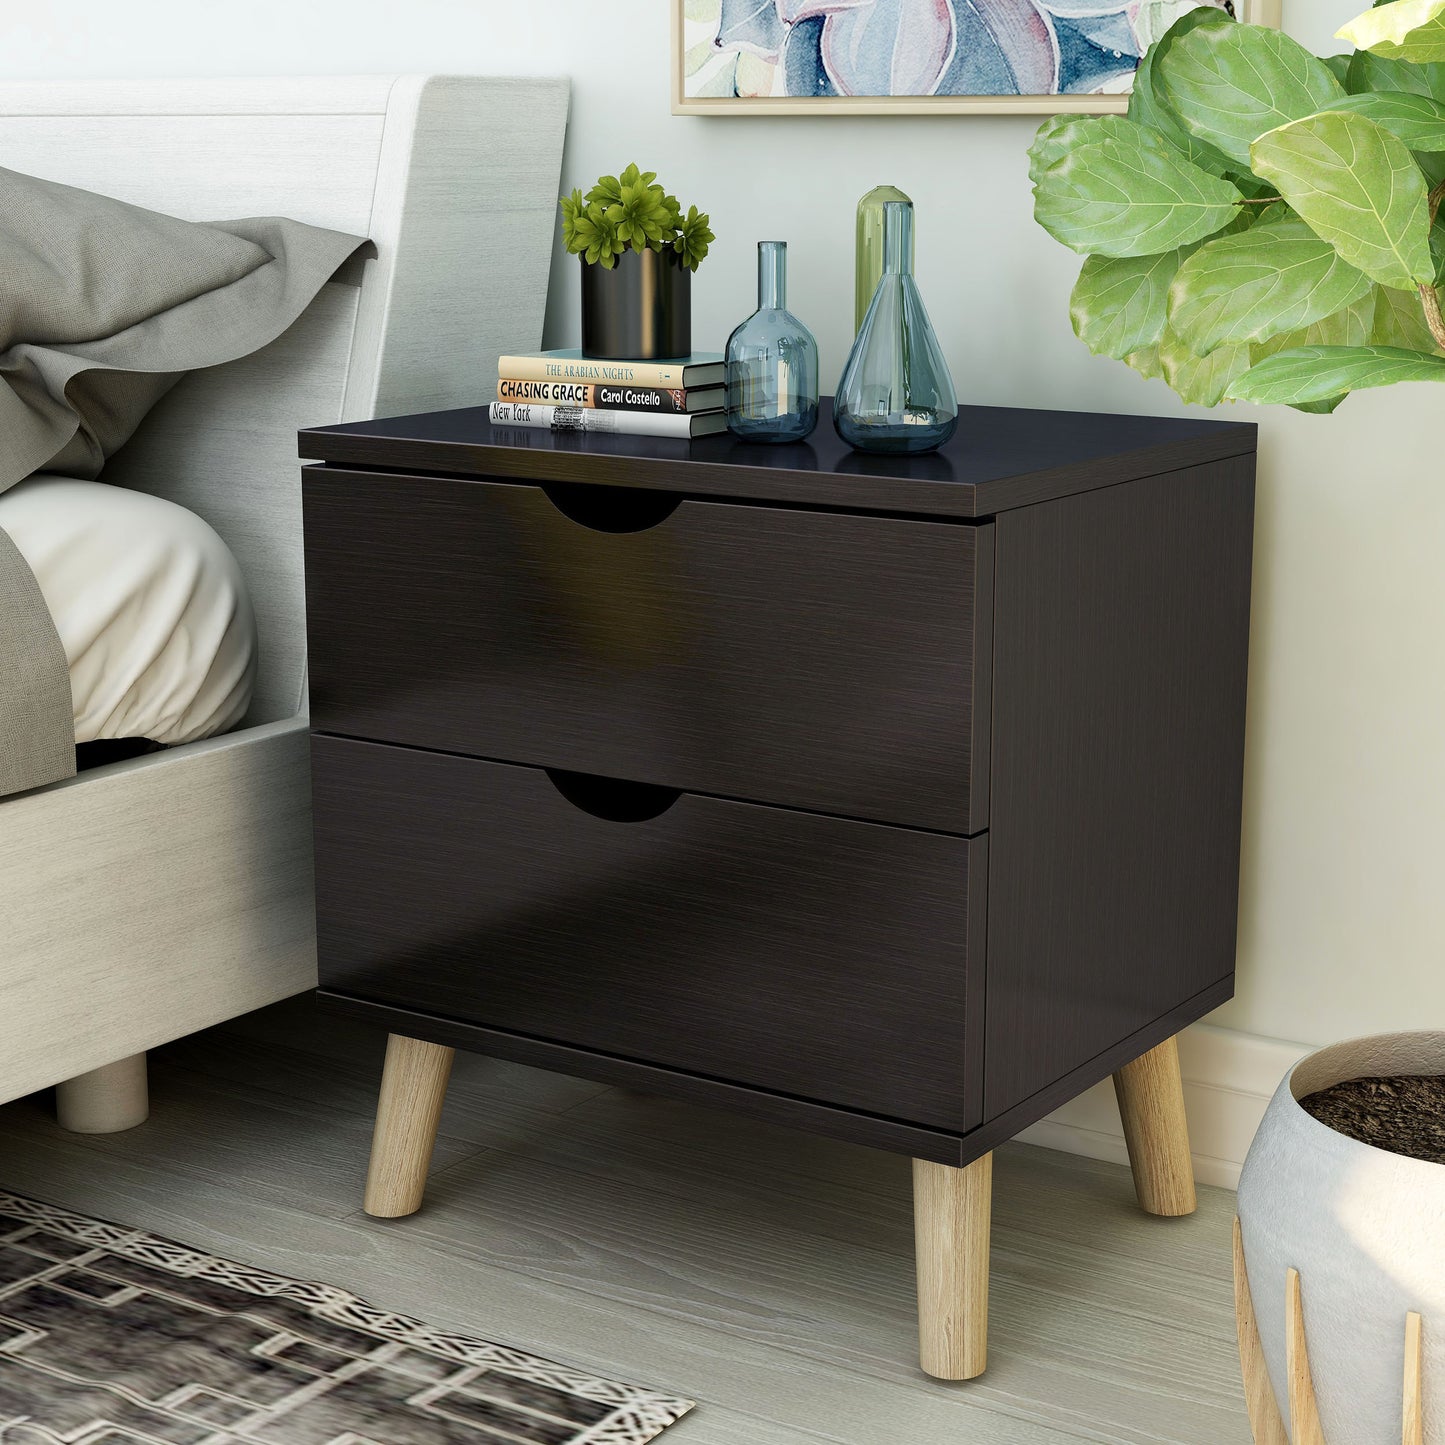 Left angled mid-century modern cappuccino two-drawer nightstand in a bedroom with accessories